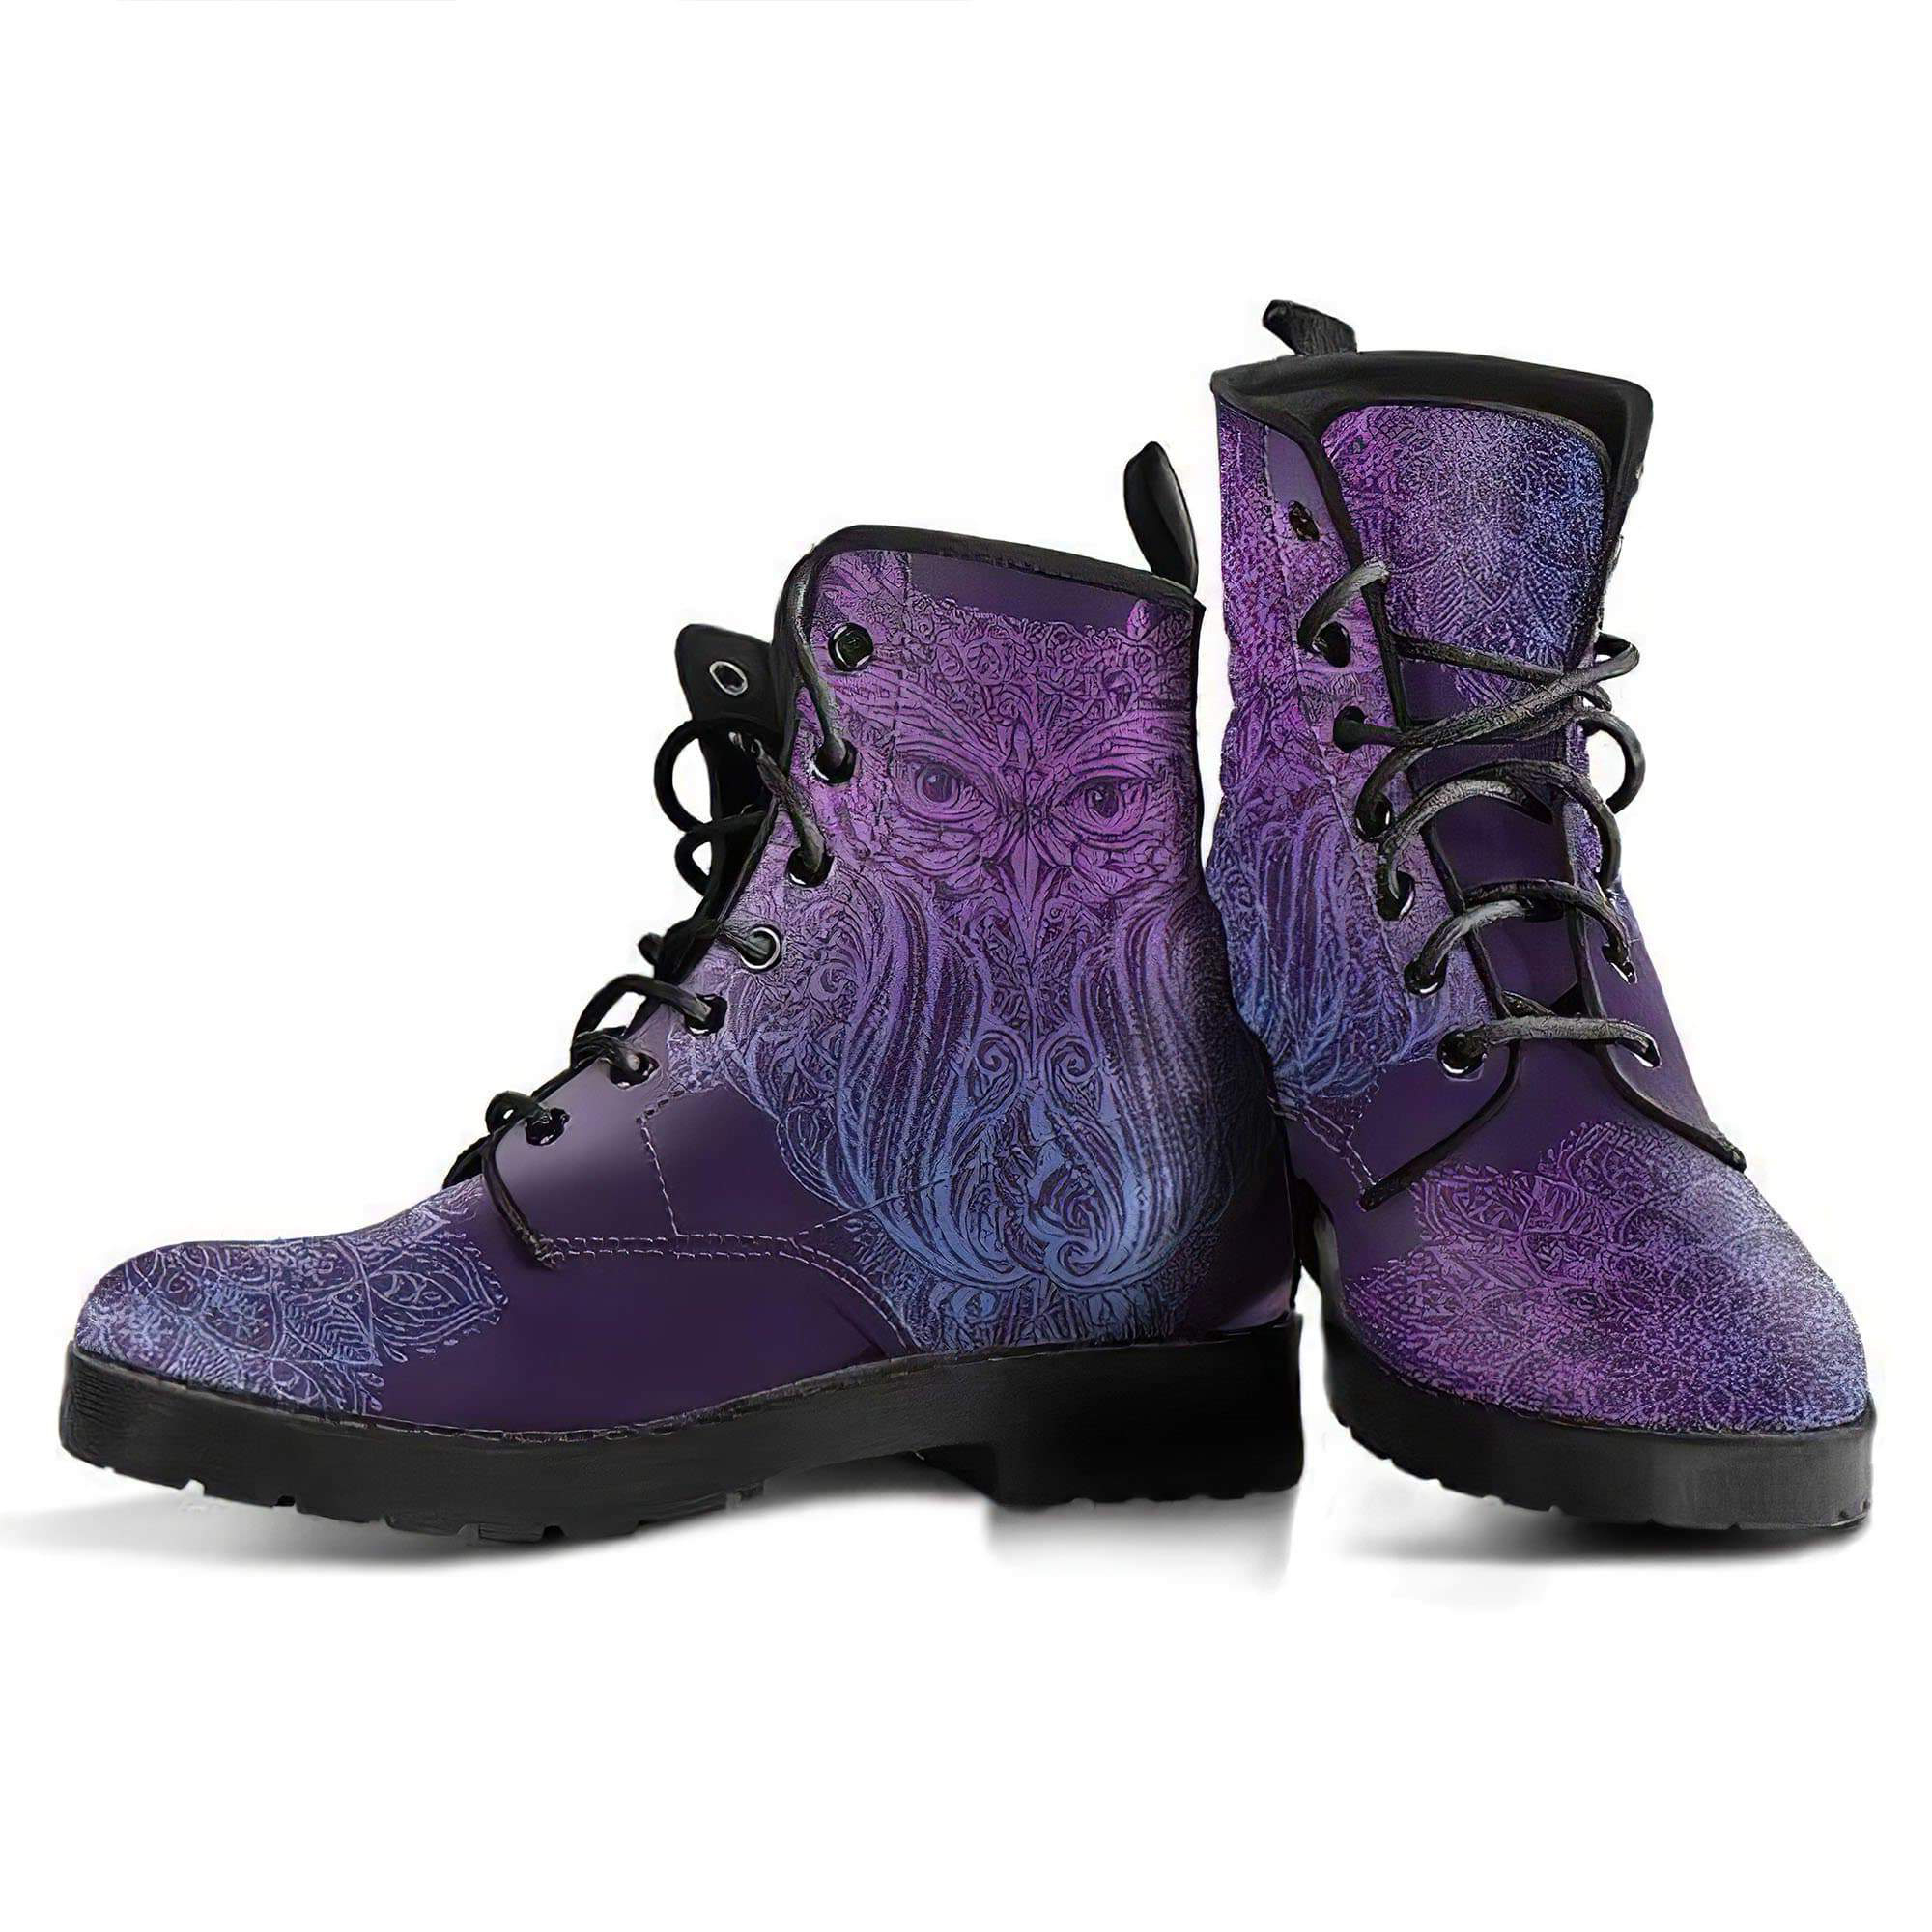 purple-owl-handcrafted-boots-women-s-leather-boots-12051937624125.jpg